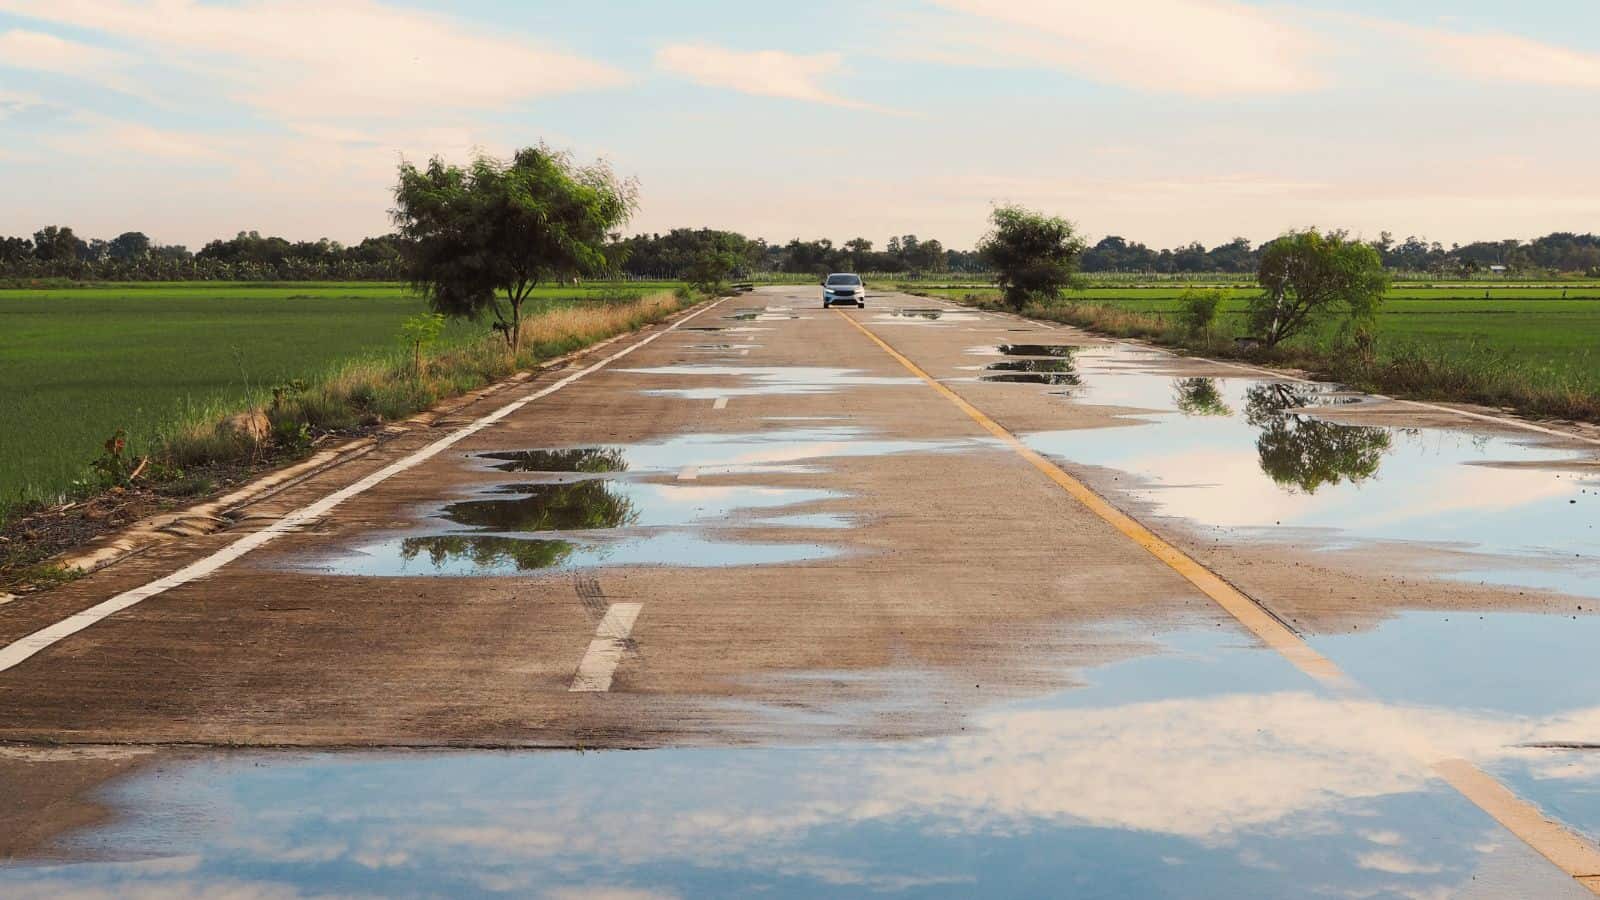 Water on the Roadway